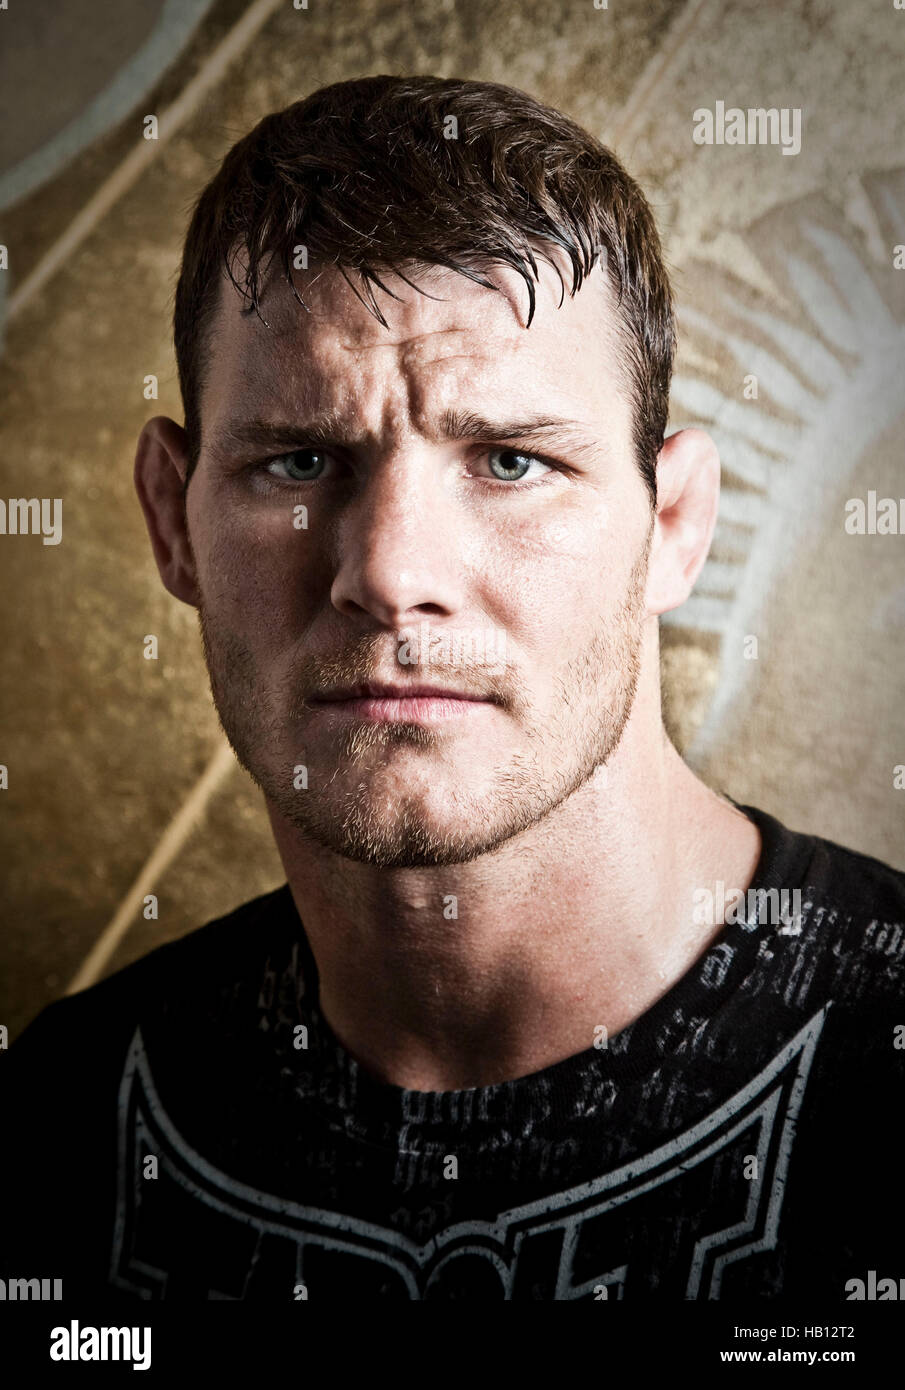 michael-bisping-during-a-portrait-session-before-ufc-114-on-may-27-HB12T2.jpg